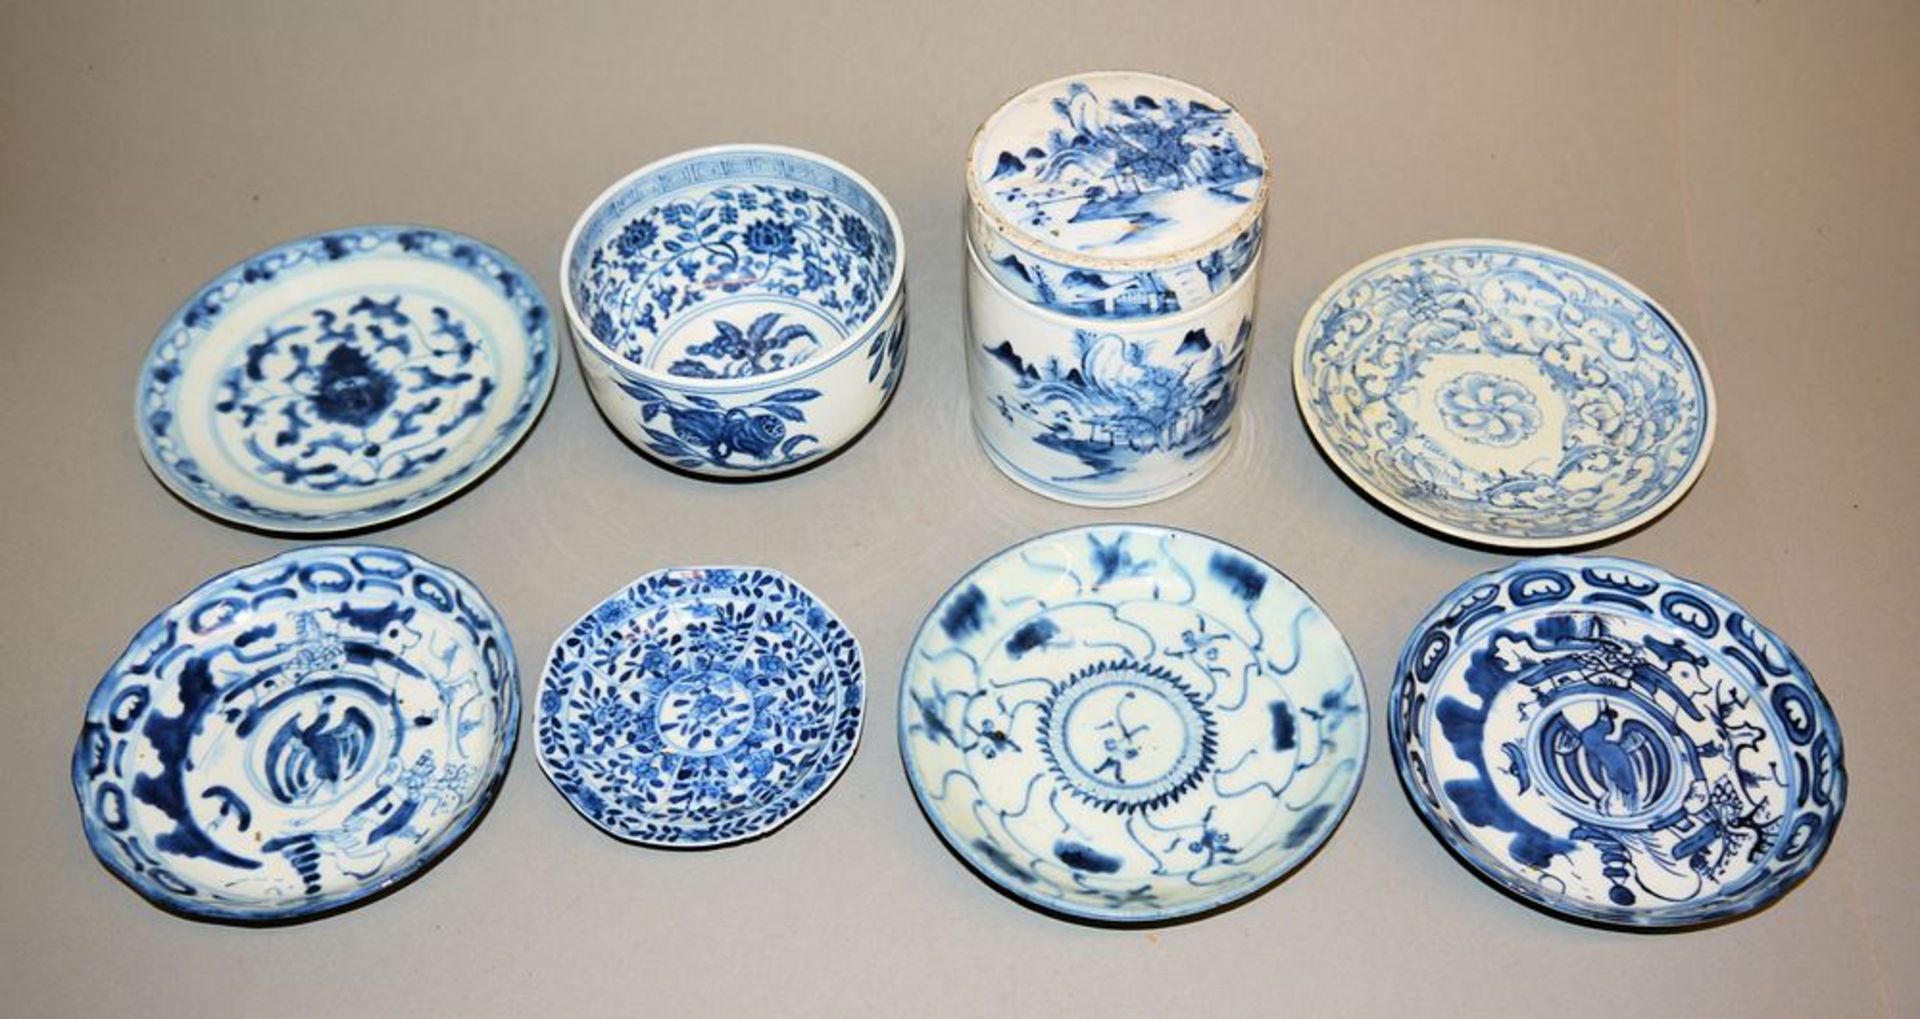 Dish, bowl and six plates in blue-whiteß-porcelain, China 18th-20th century.